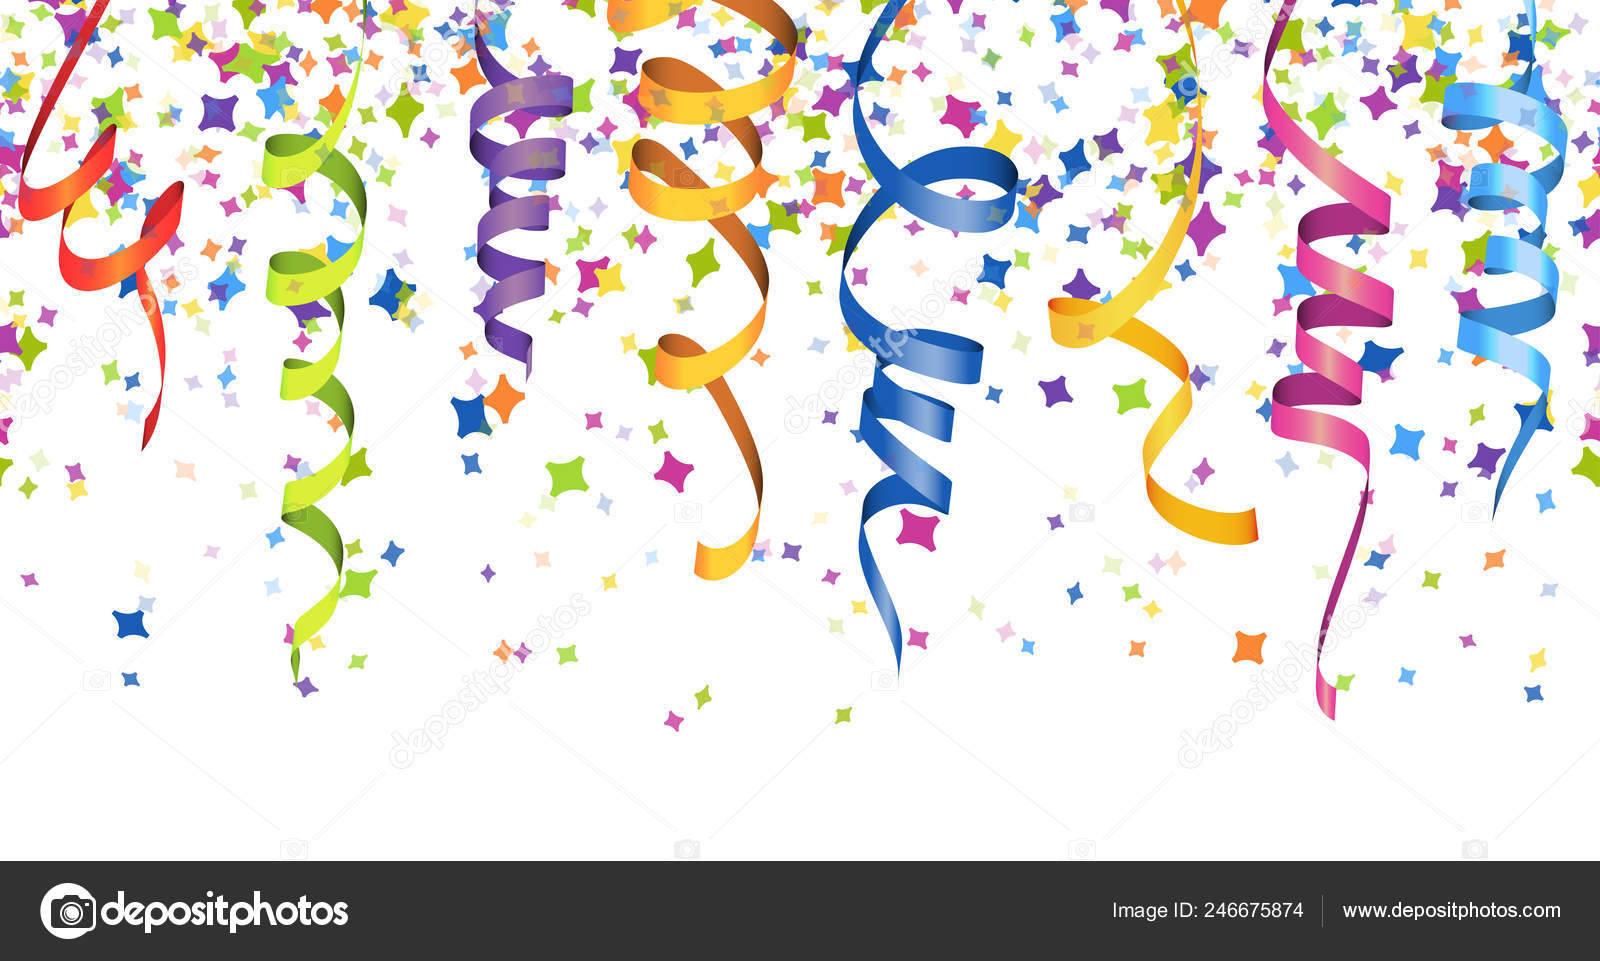 vector illustration of seamless silver colored confetti, garlands and  streamers on white background for party or carnival usage